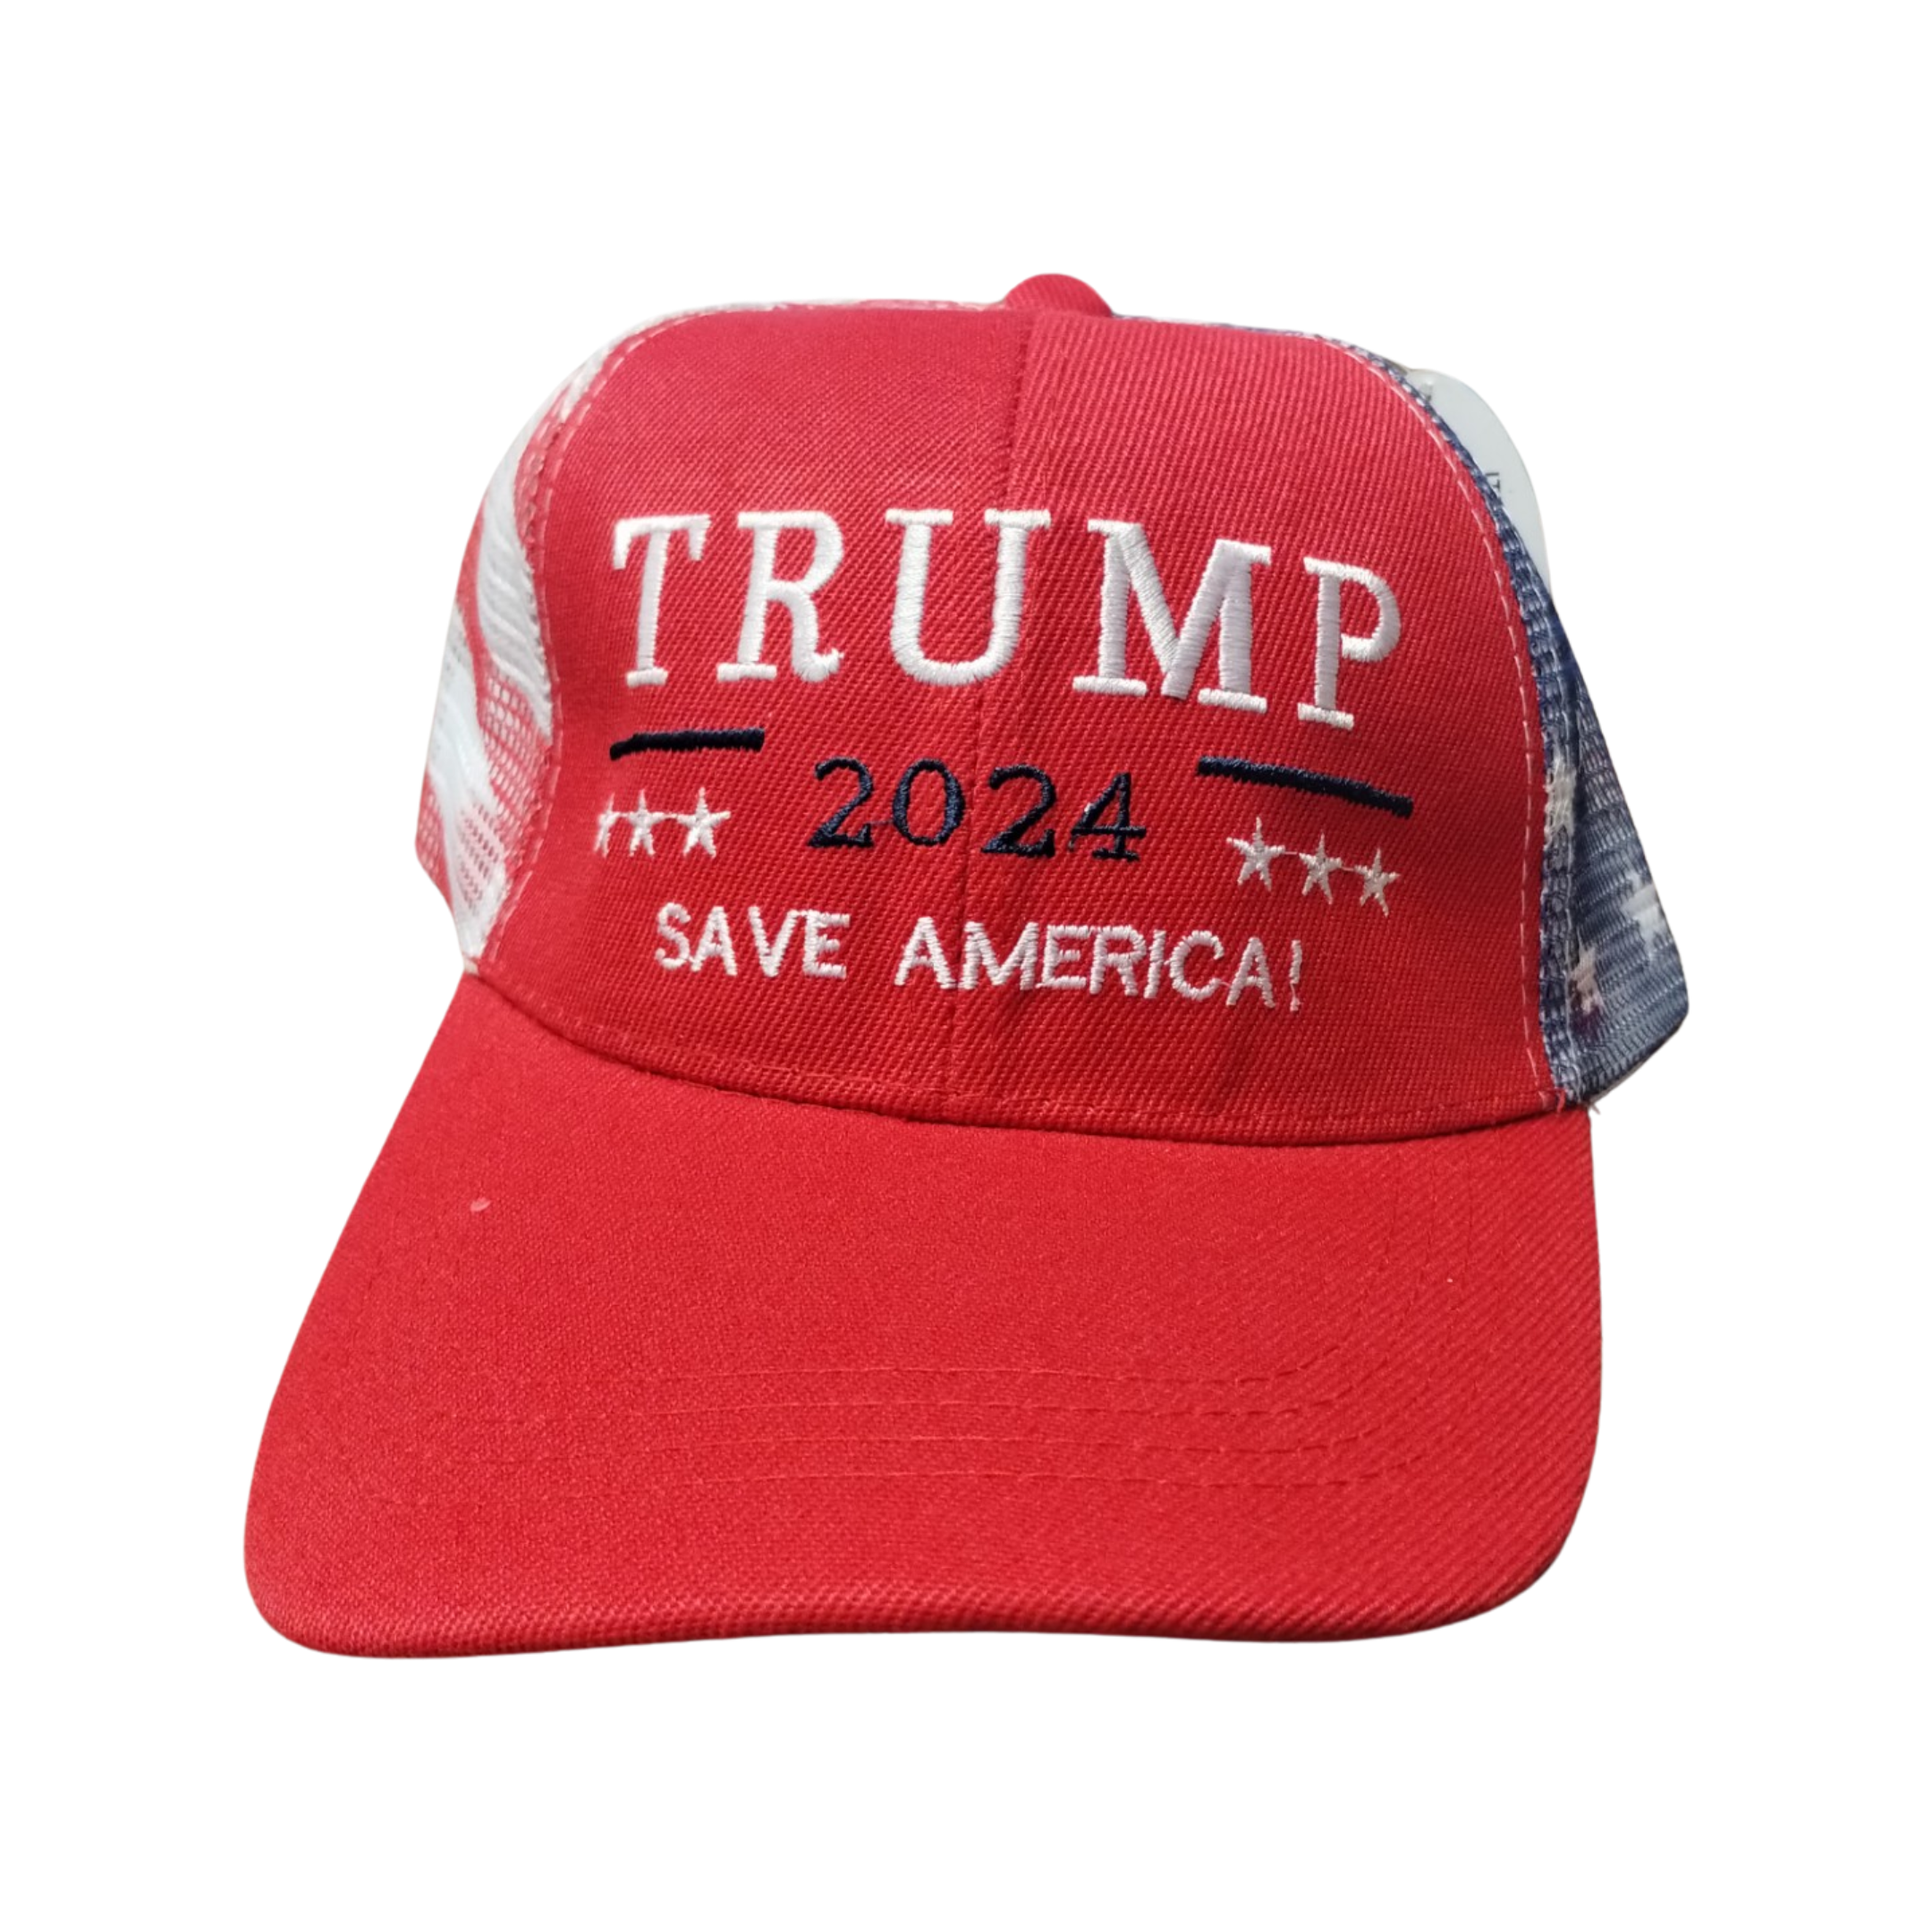 Trump 2024 Save America BASEBALL CAP - Support for the 45th President